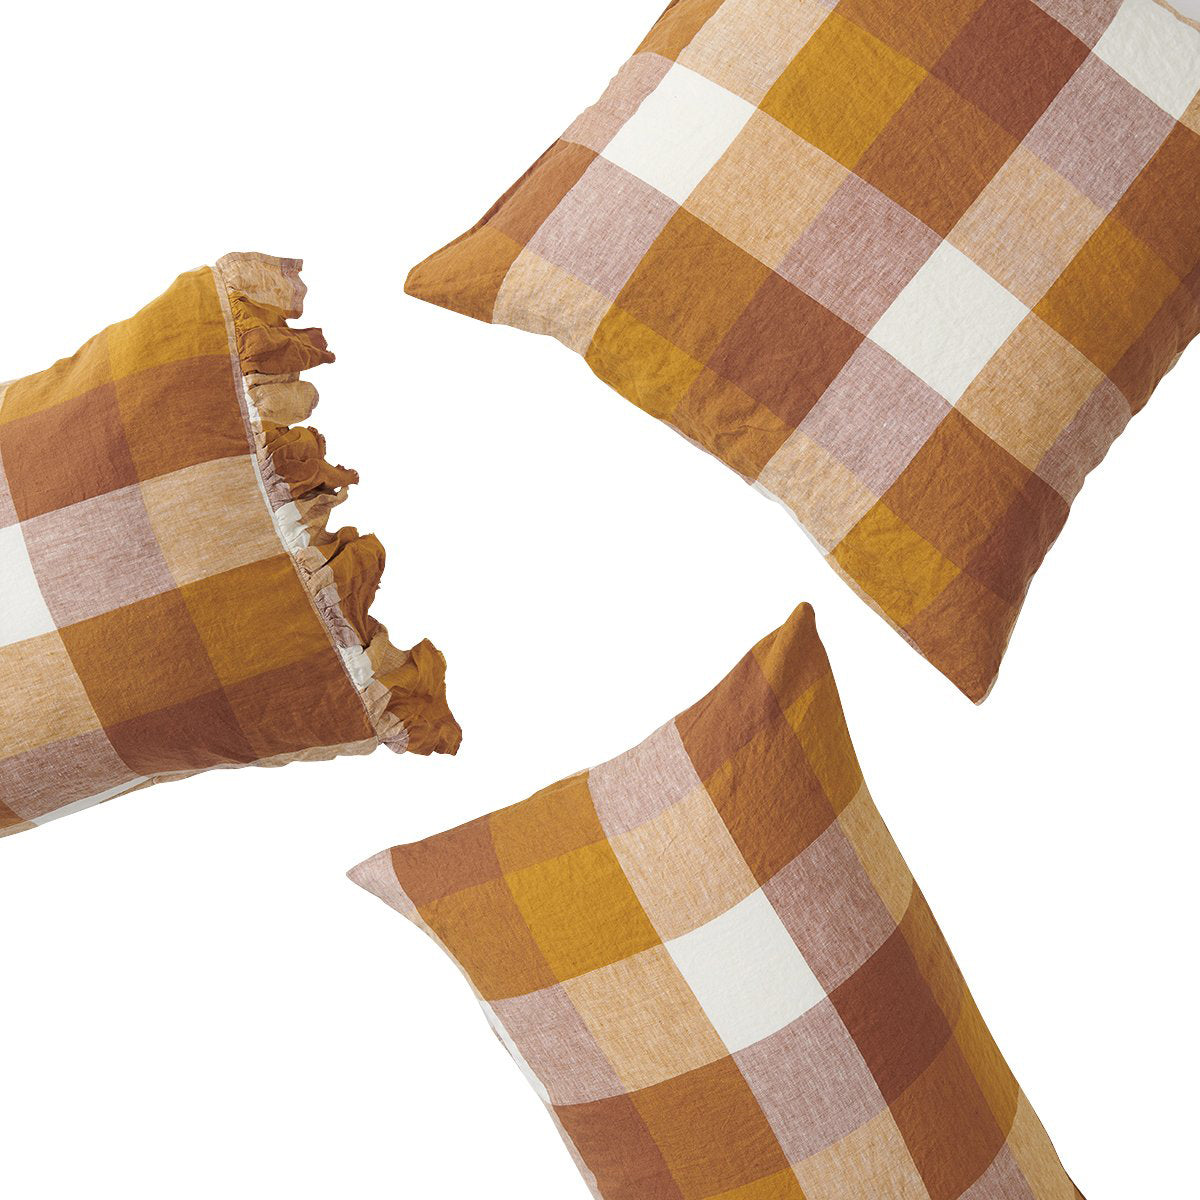 Society of wanderers Biscuit Check Pillowcase Sets